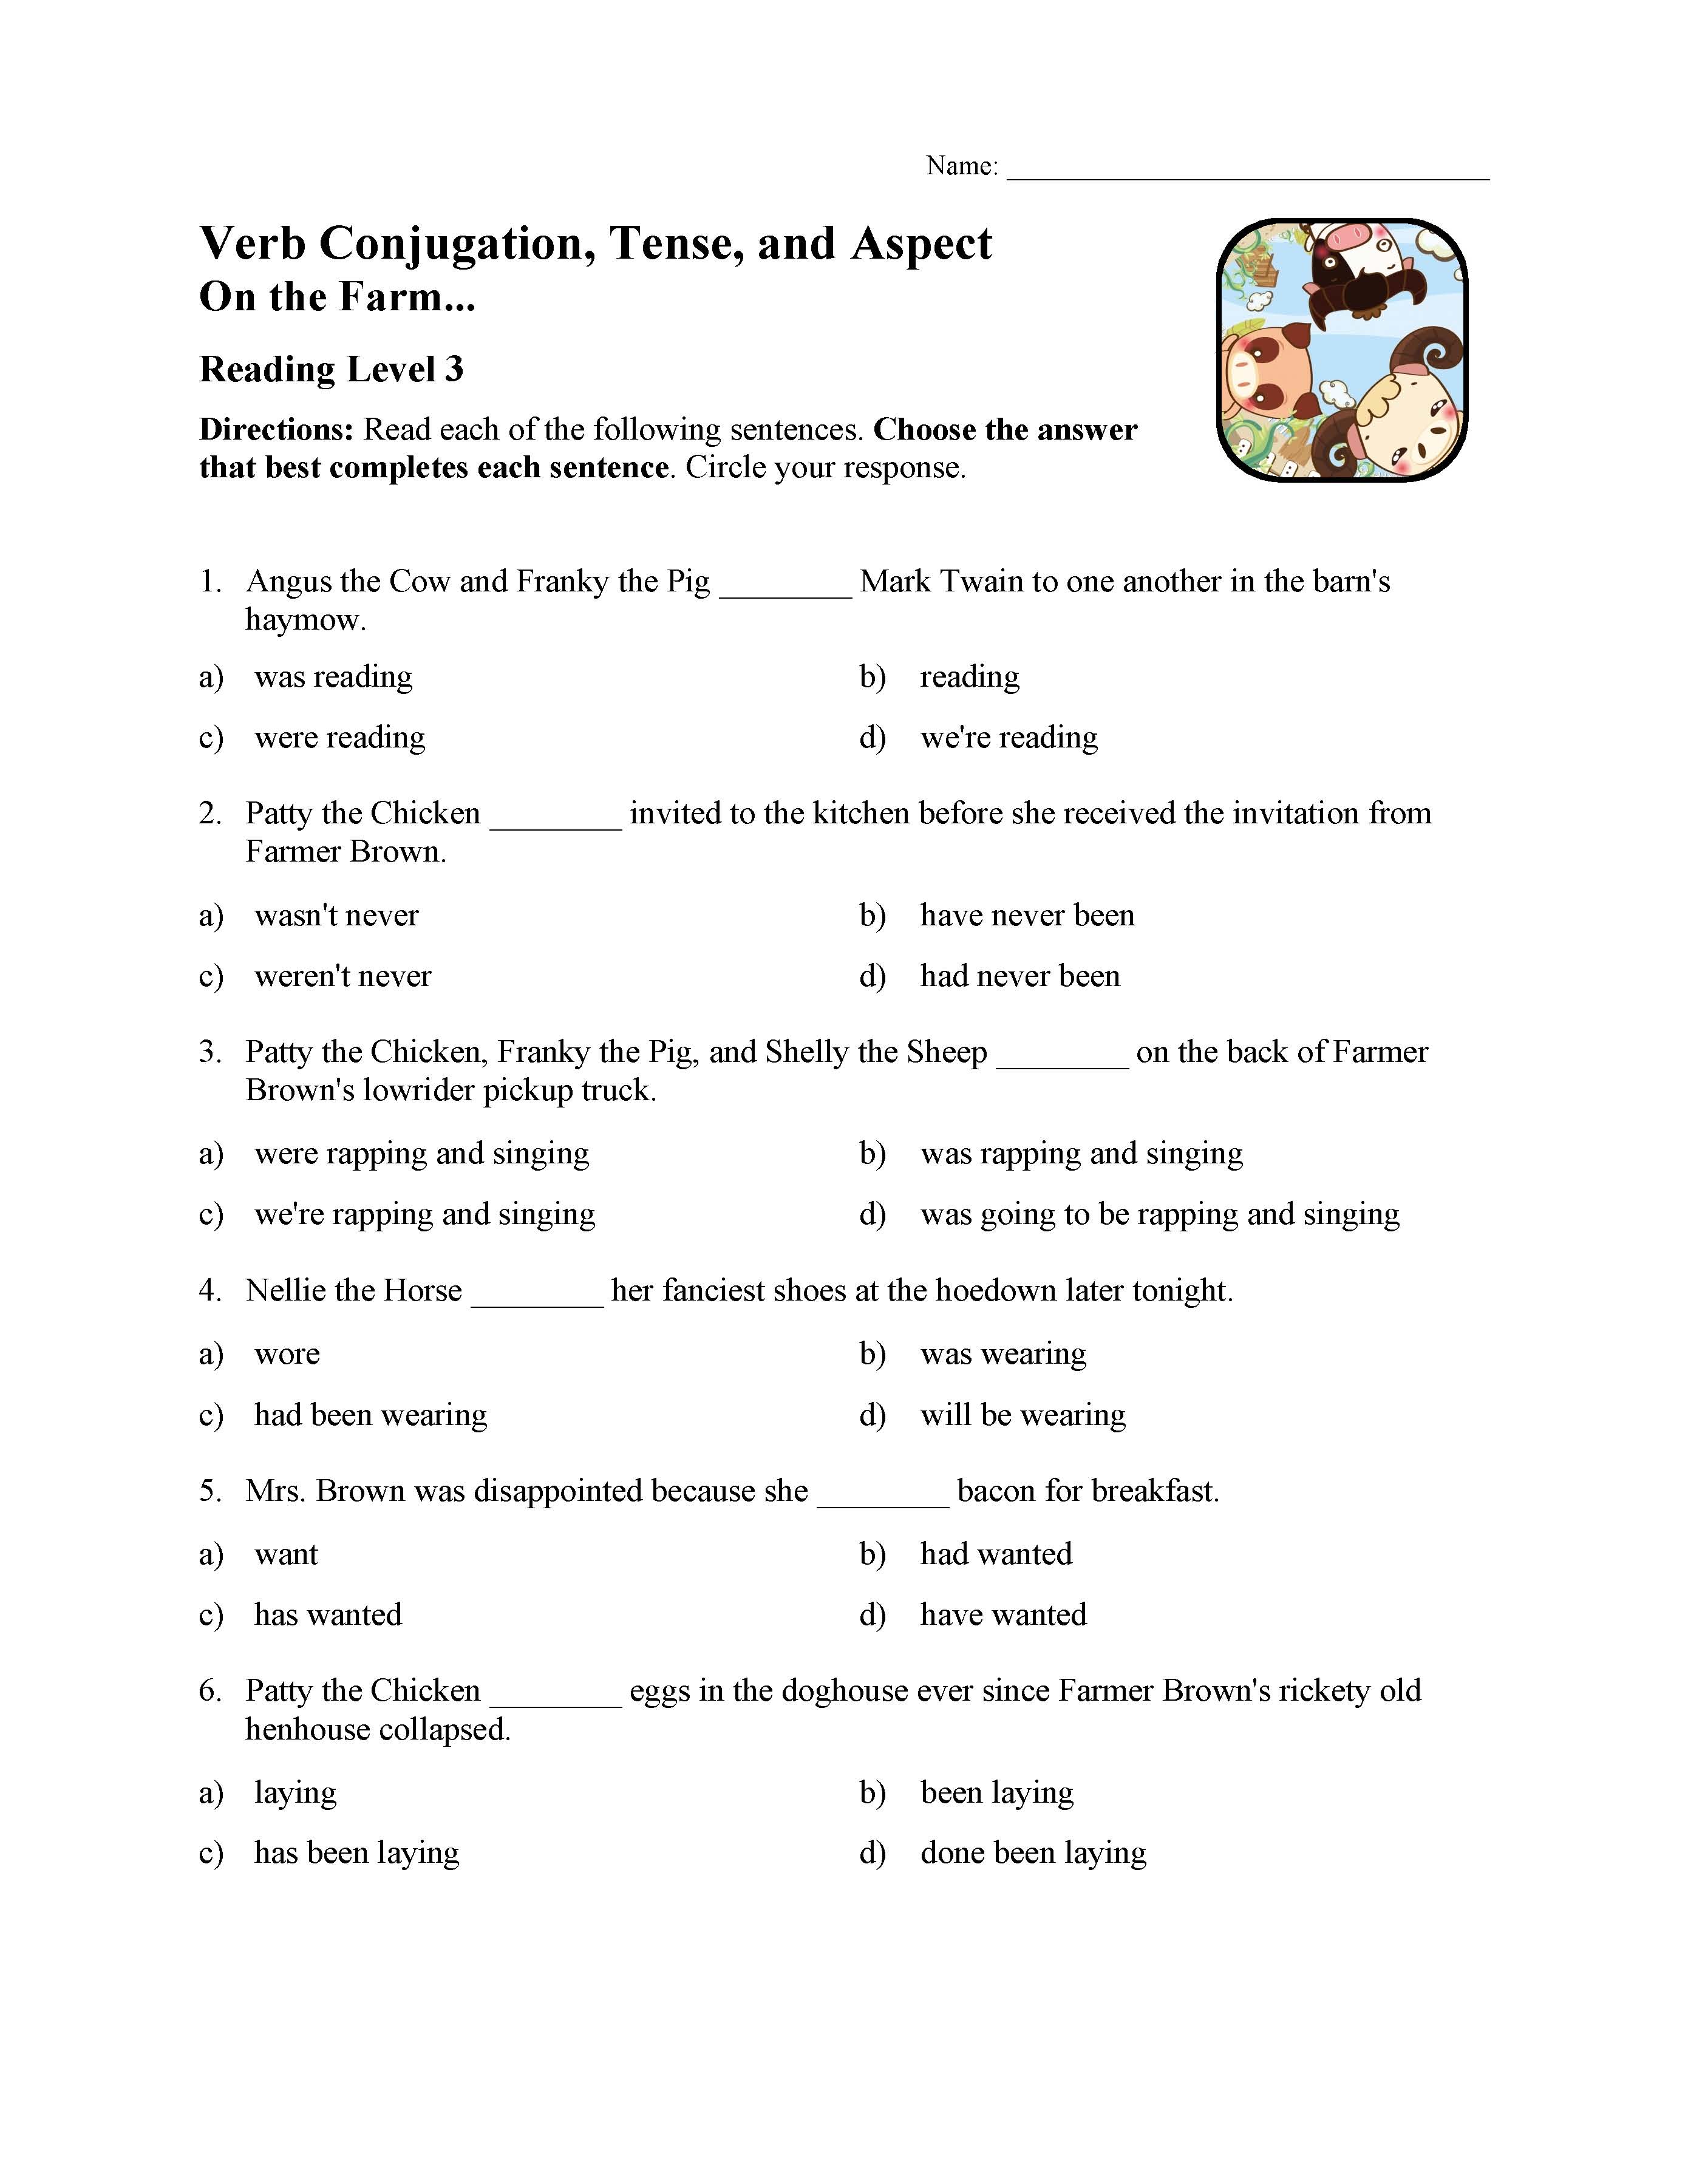 This is a preview image of the Verb Conjugation, Tense, and Aspect Test - On the Farm | Reading Level 3.